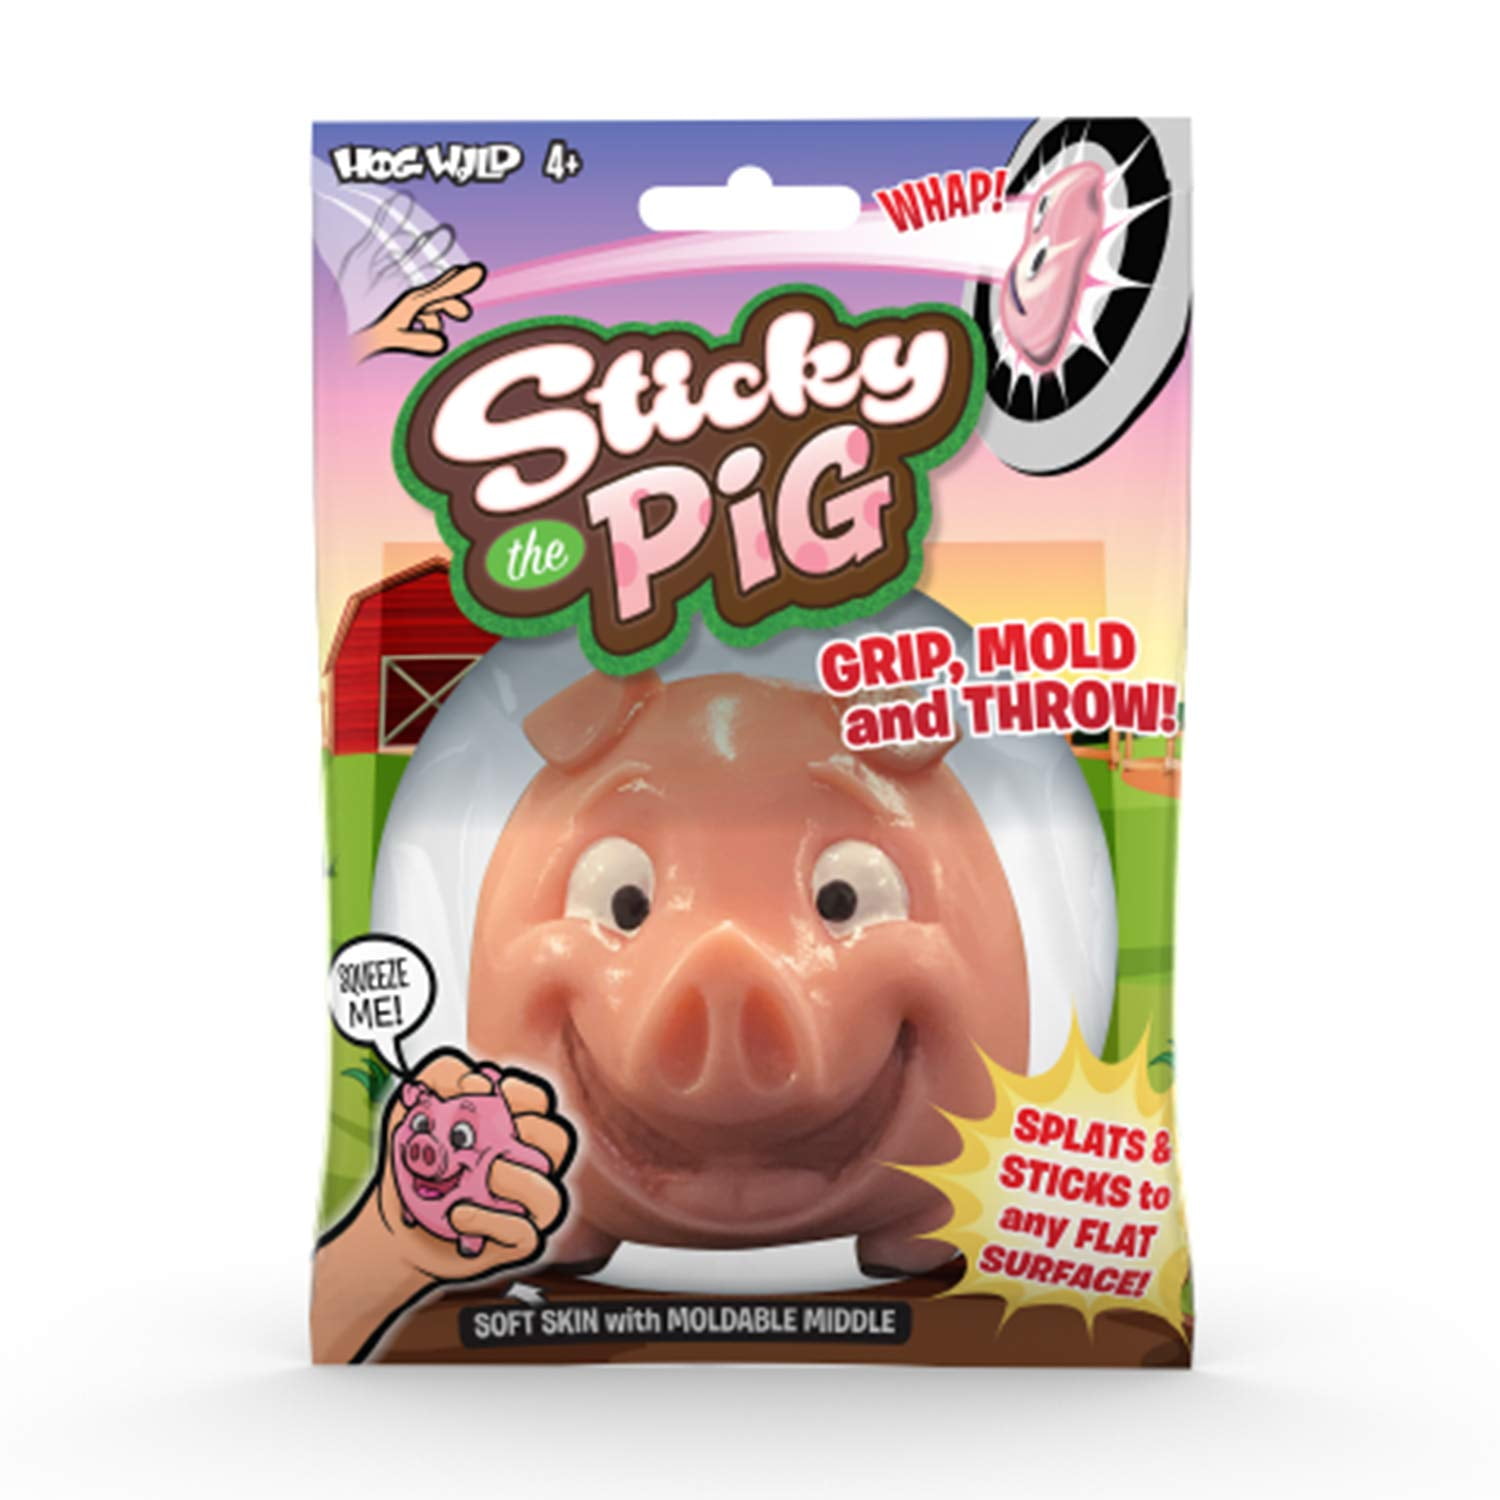 Squishy Toy Splats and Sticks to Flat Surfaces Details about   Hog Wild Sticky Tootsie Roll 